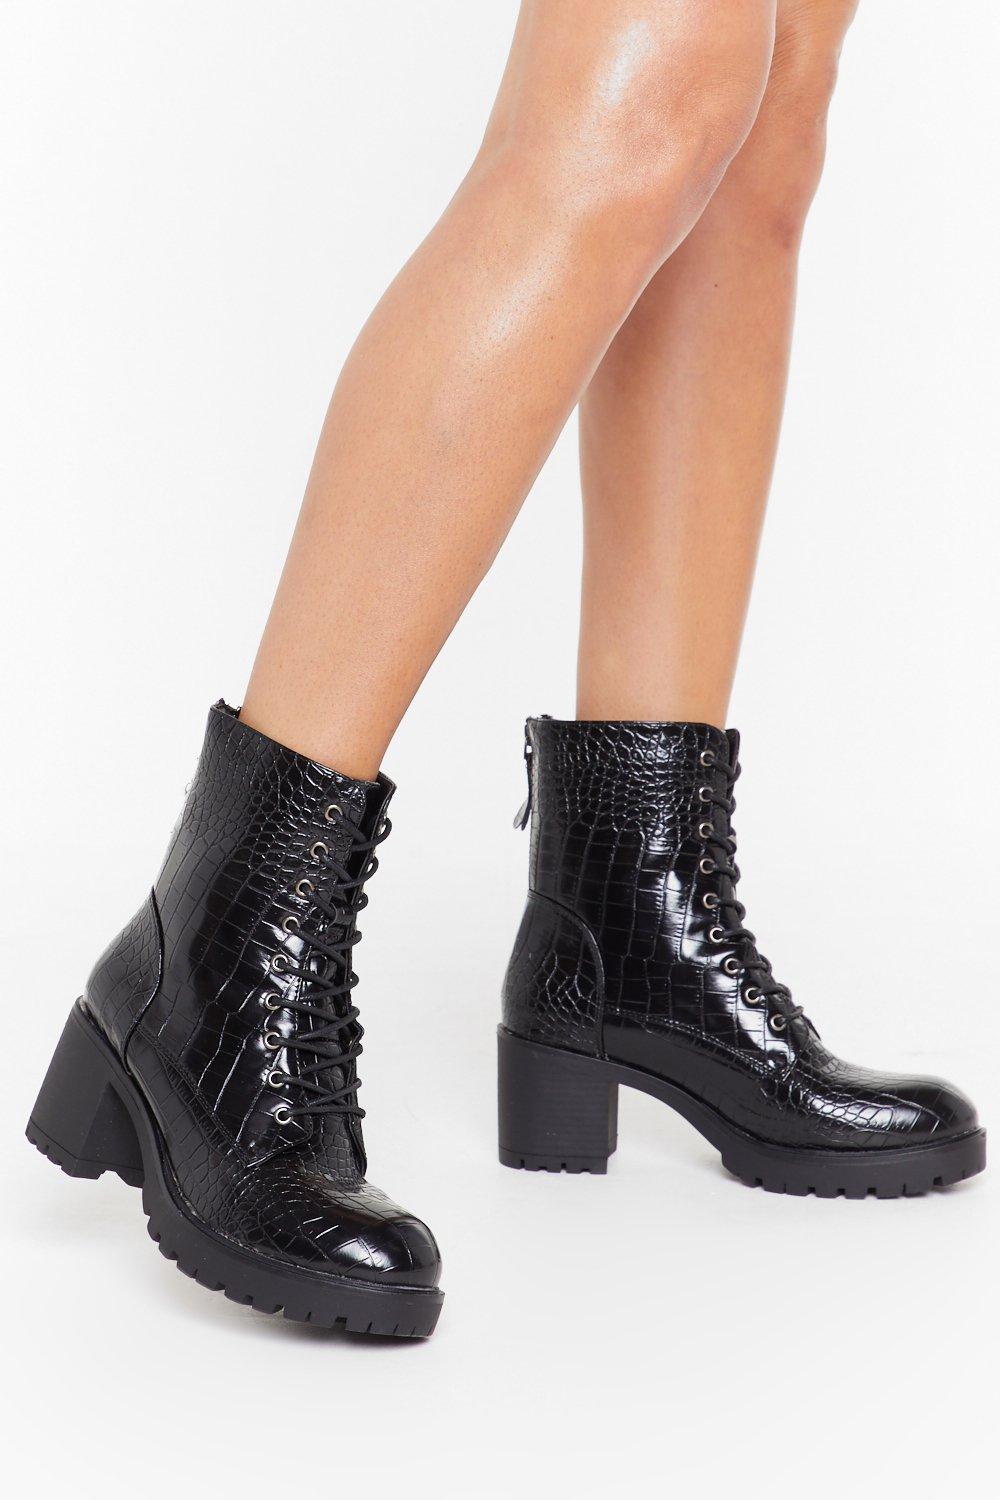 Croc Faux Leather Lace-Up Boots | Nasty Gal